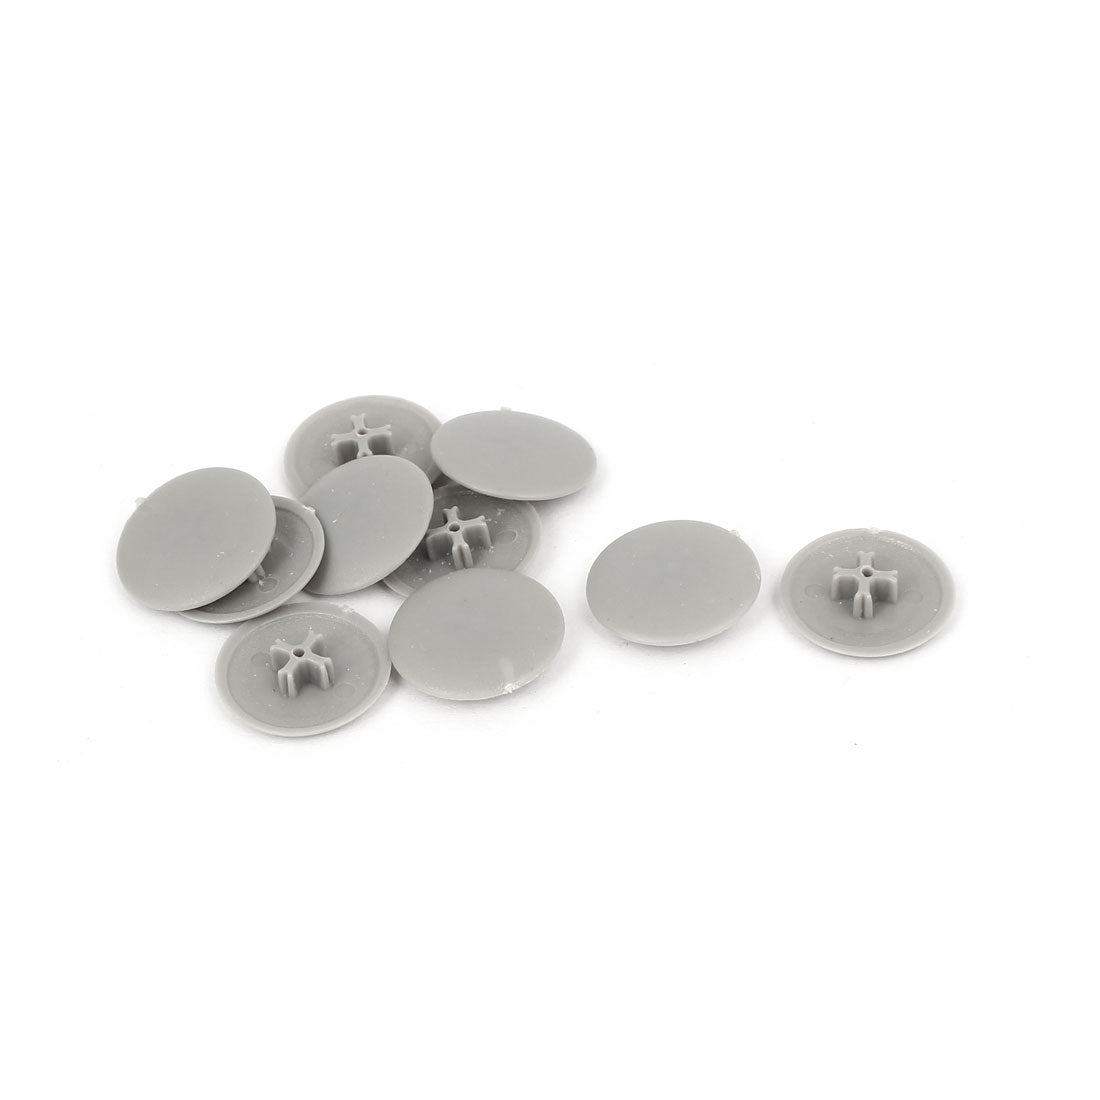 uxcell Uxcell 17mm x 4mm Plastic Round Phillips Screw Cap Cross Head Cover Gray 10pcs